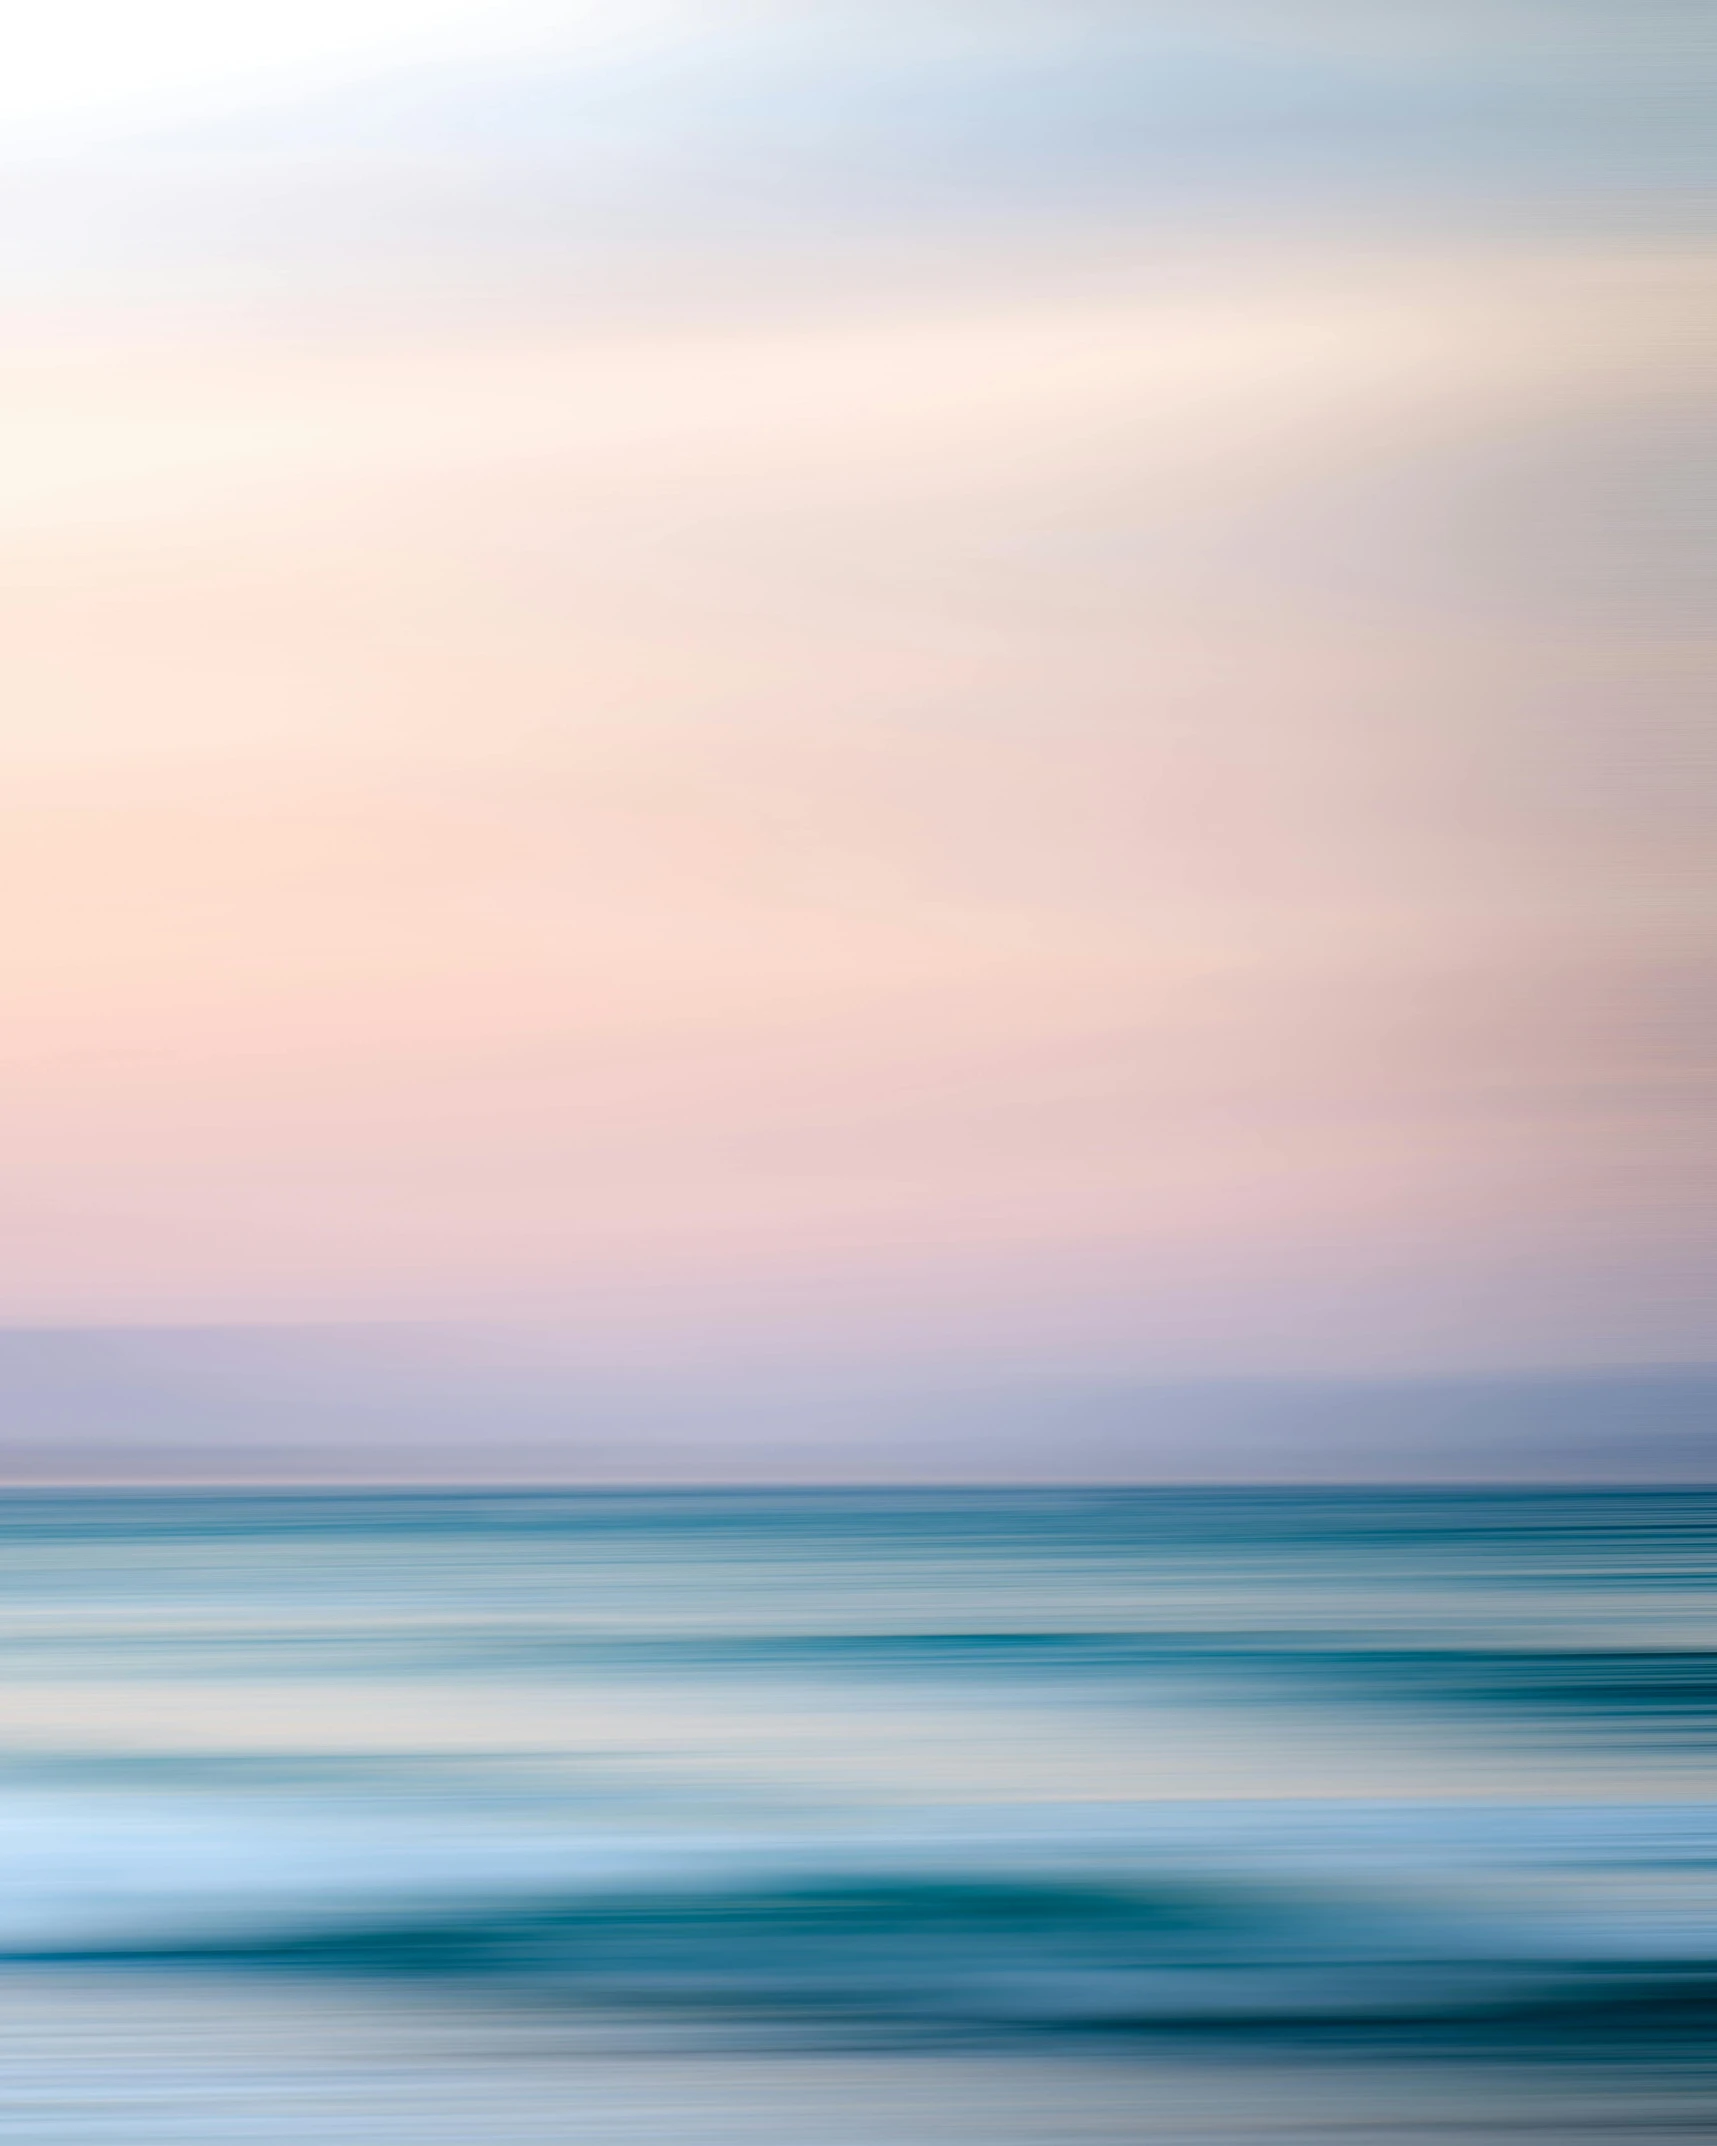 a man riding a surfboard on top of a wave, a minimalist painting, by Andrew Geddes, unsplash contest winner, minimalism, pastel blues and pinks, calm evening, abstract landscape, blurred